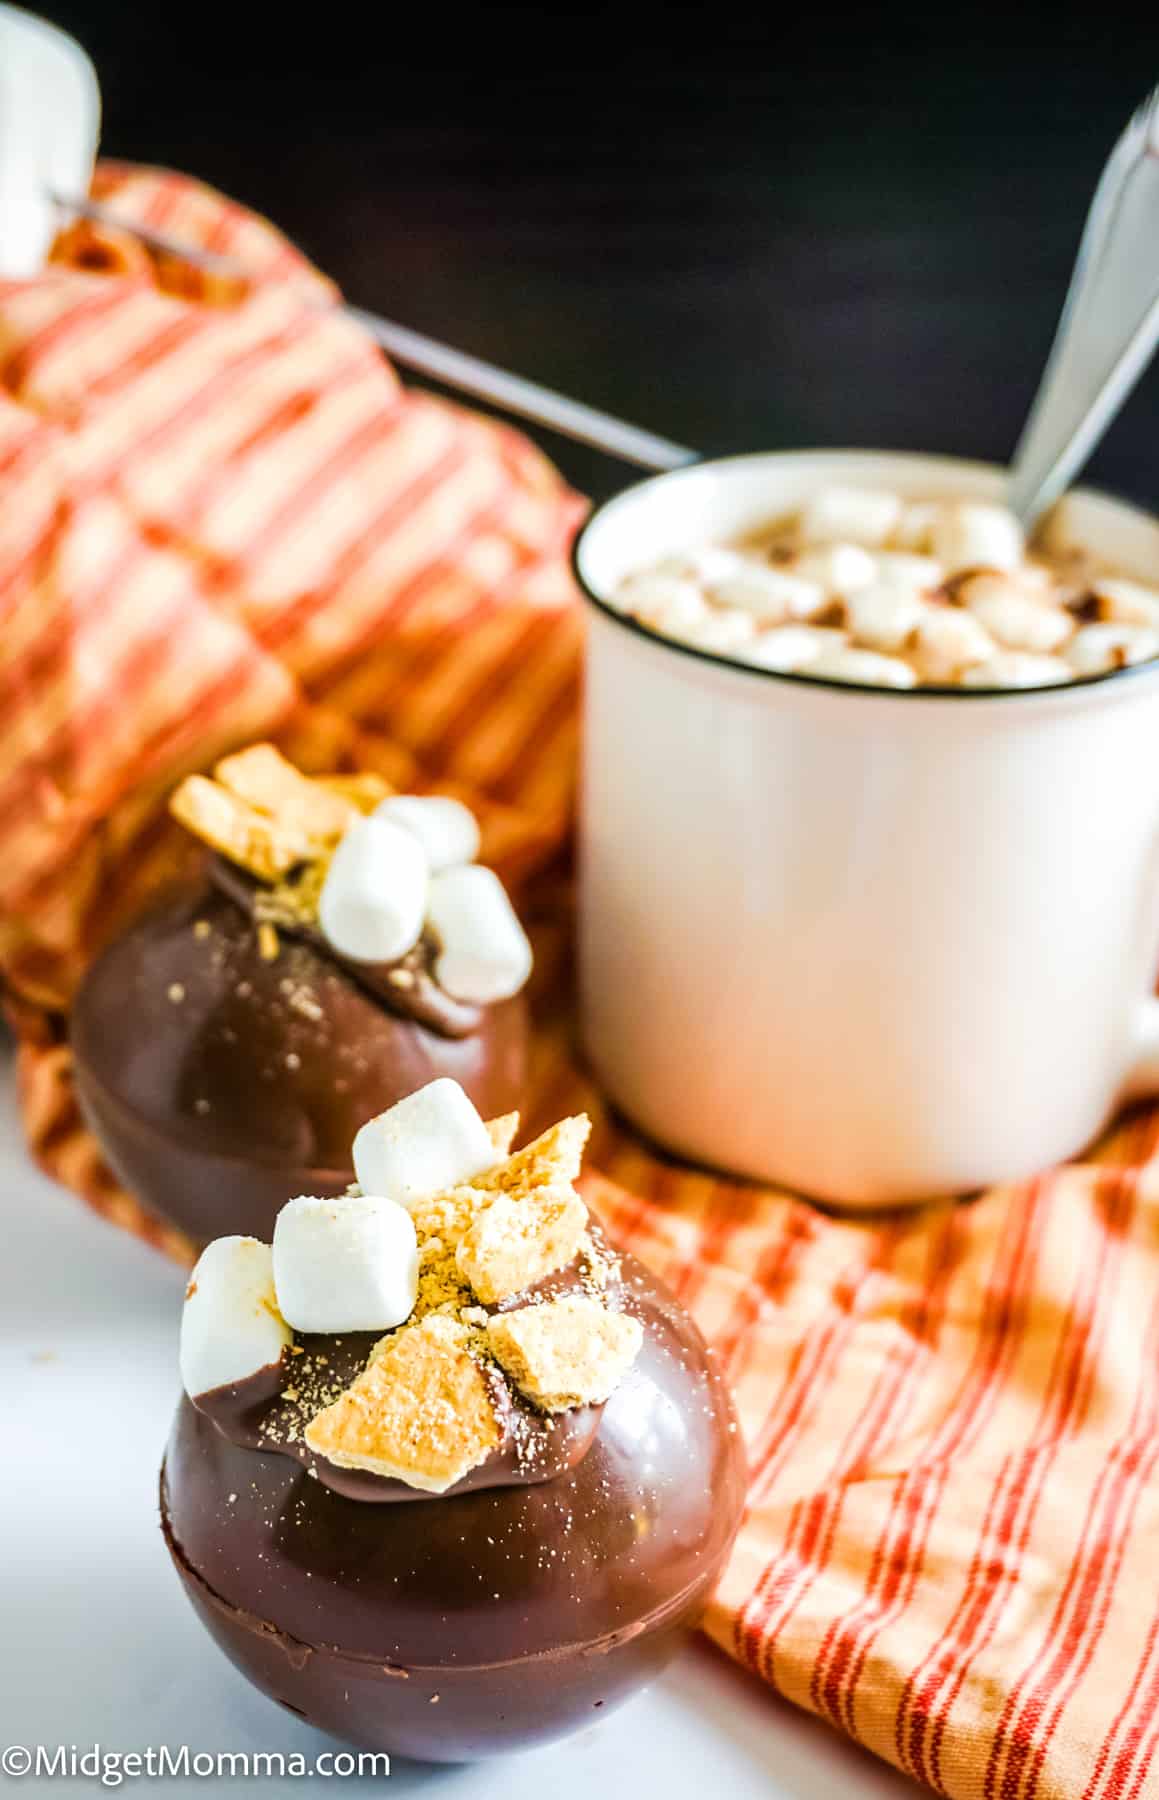 2 smores hot chocolate bombs and a cup of hot chocolate made with a hot chocolate bomb